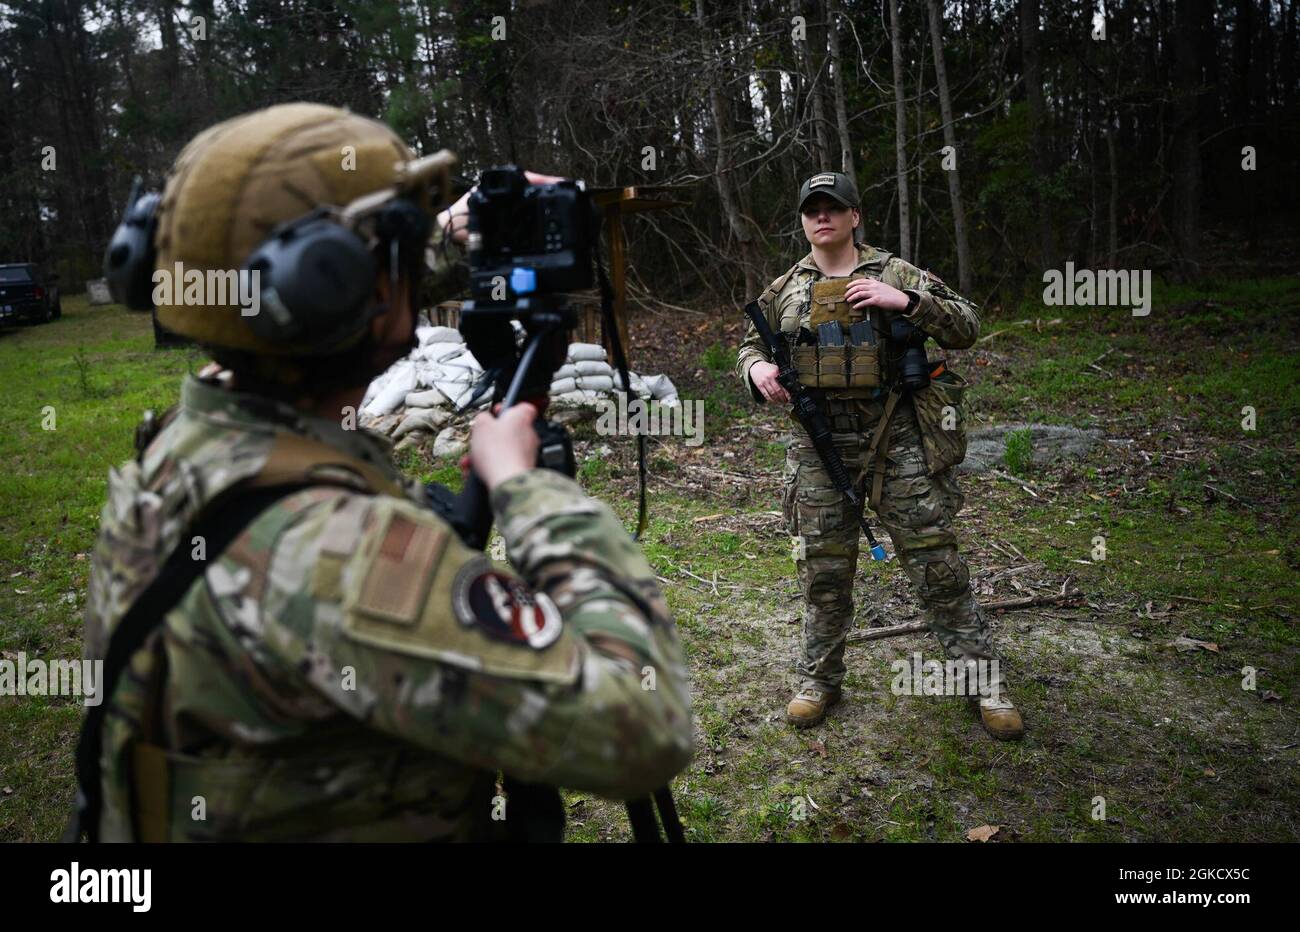 U.S. Air Force Staff Sgt. Cambria Ferguson, a combat videographer assigned to the 1st Combat Camera Squadron (1st CTCS), conducts an interview with U. S. Air Force Senior Airman Kelly Walker, also a combat photographer assigned to the 1st CTCS, during Exercise Scorpion Lens at Joint Base Charleston, South Carolina, March 16, 2021. Scorpion Lens is an annual 1st Combat Camera Squadron exercise, that tests Combat Camera team members leadership, documentation skills, and the tactical expertise of the unit’s public affairs, and mission support airmen. Stock Photo